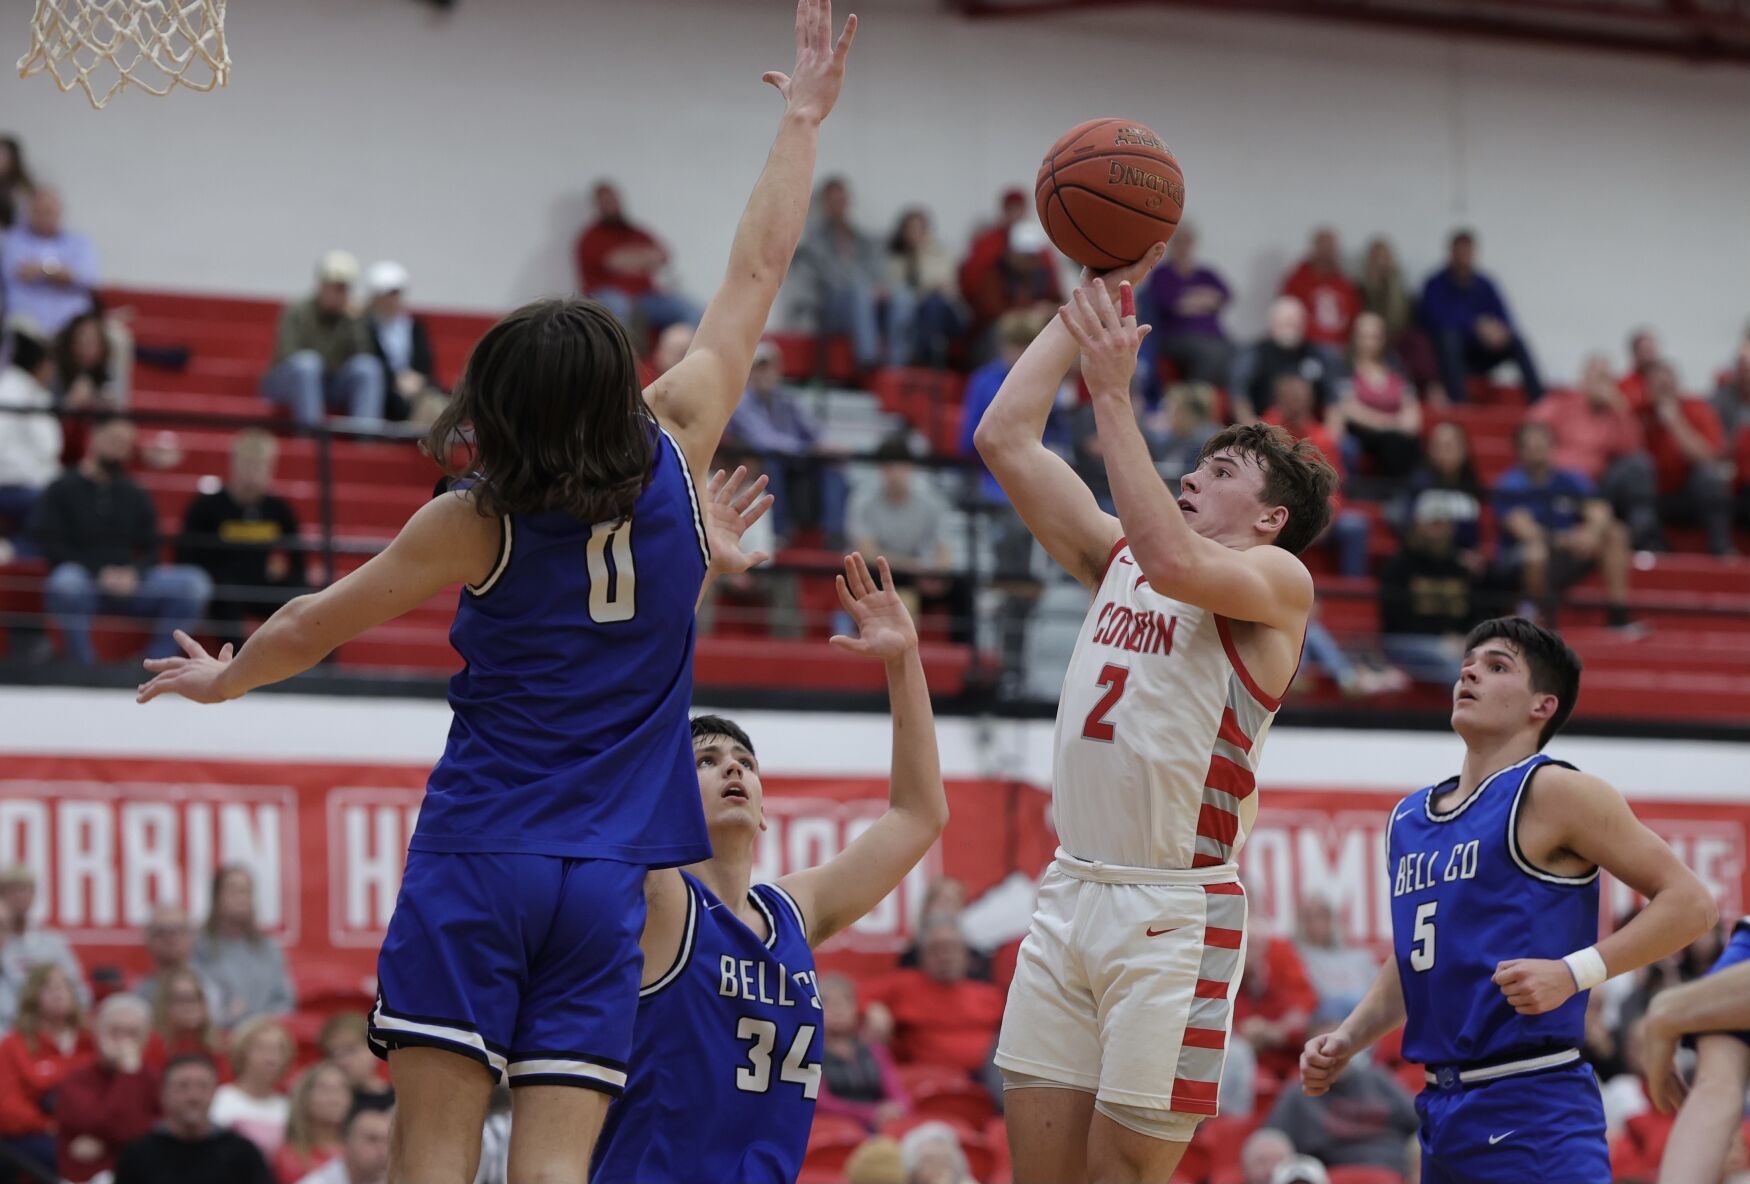 Corbin Redhounds Secure Impressive 52-39 Victory Over Bell County in High School Basketball Clash